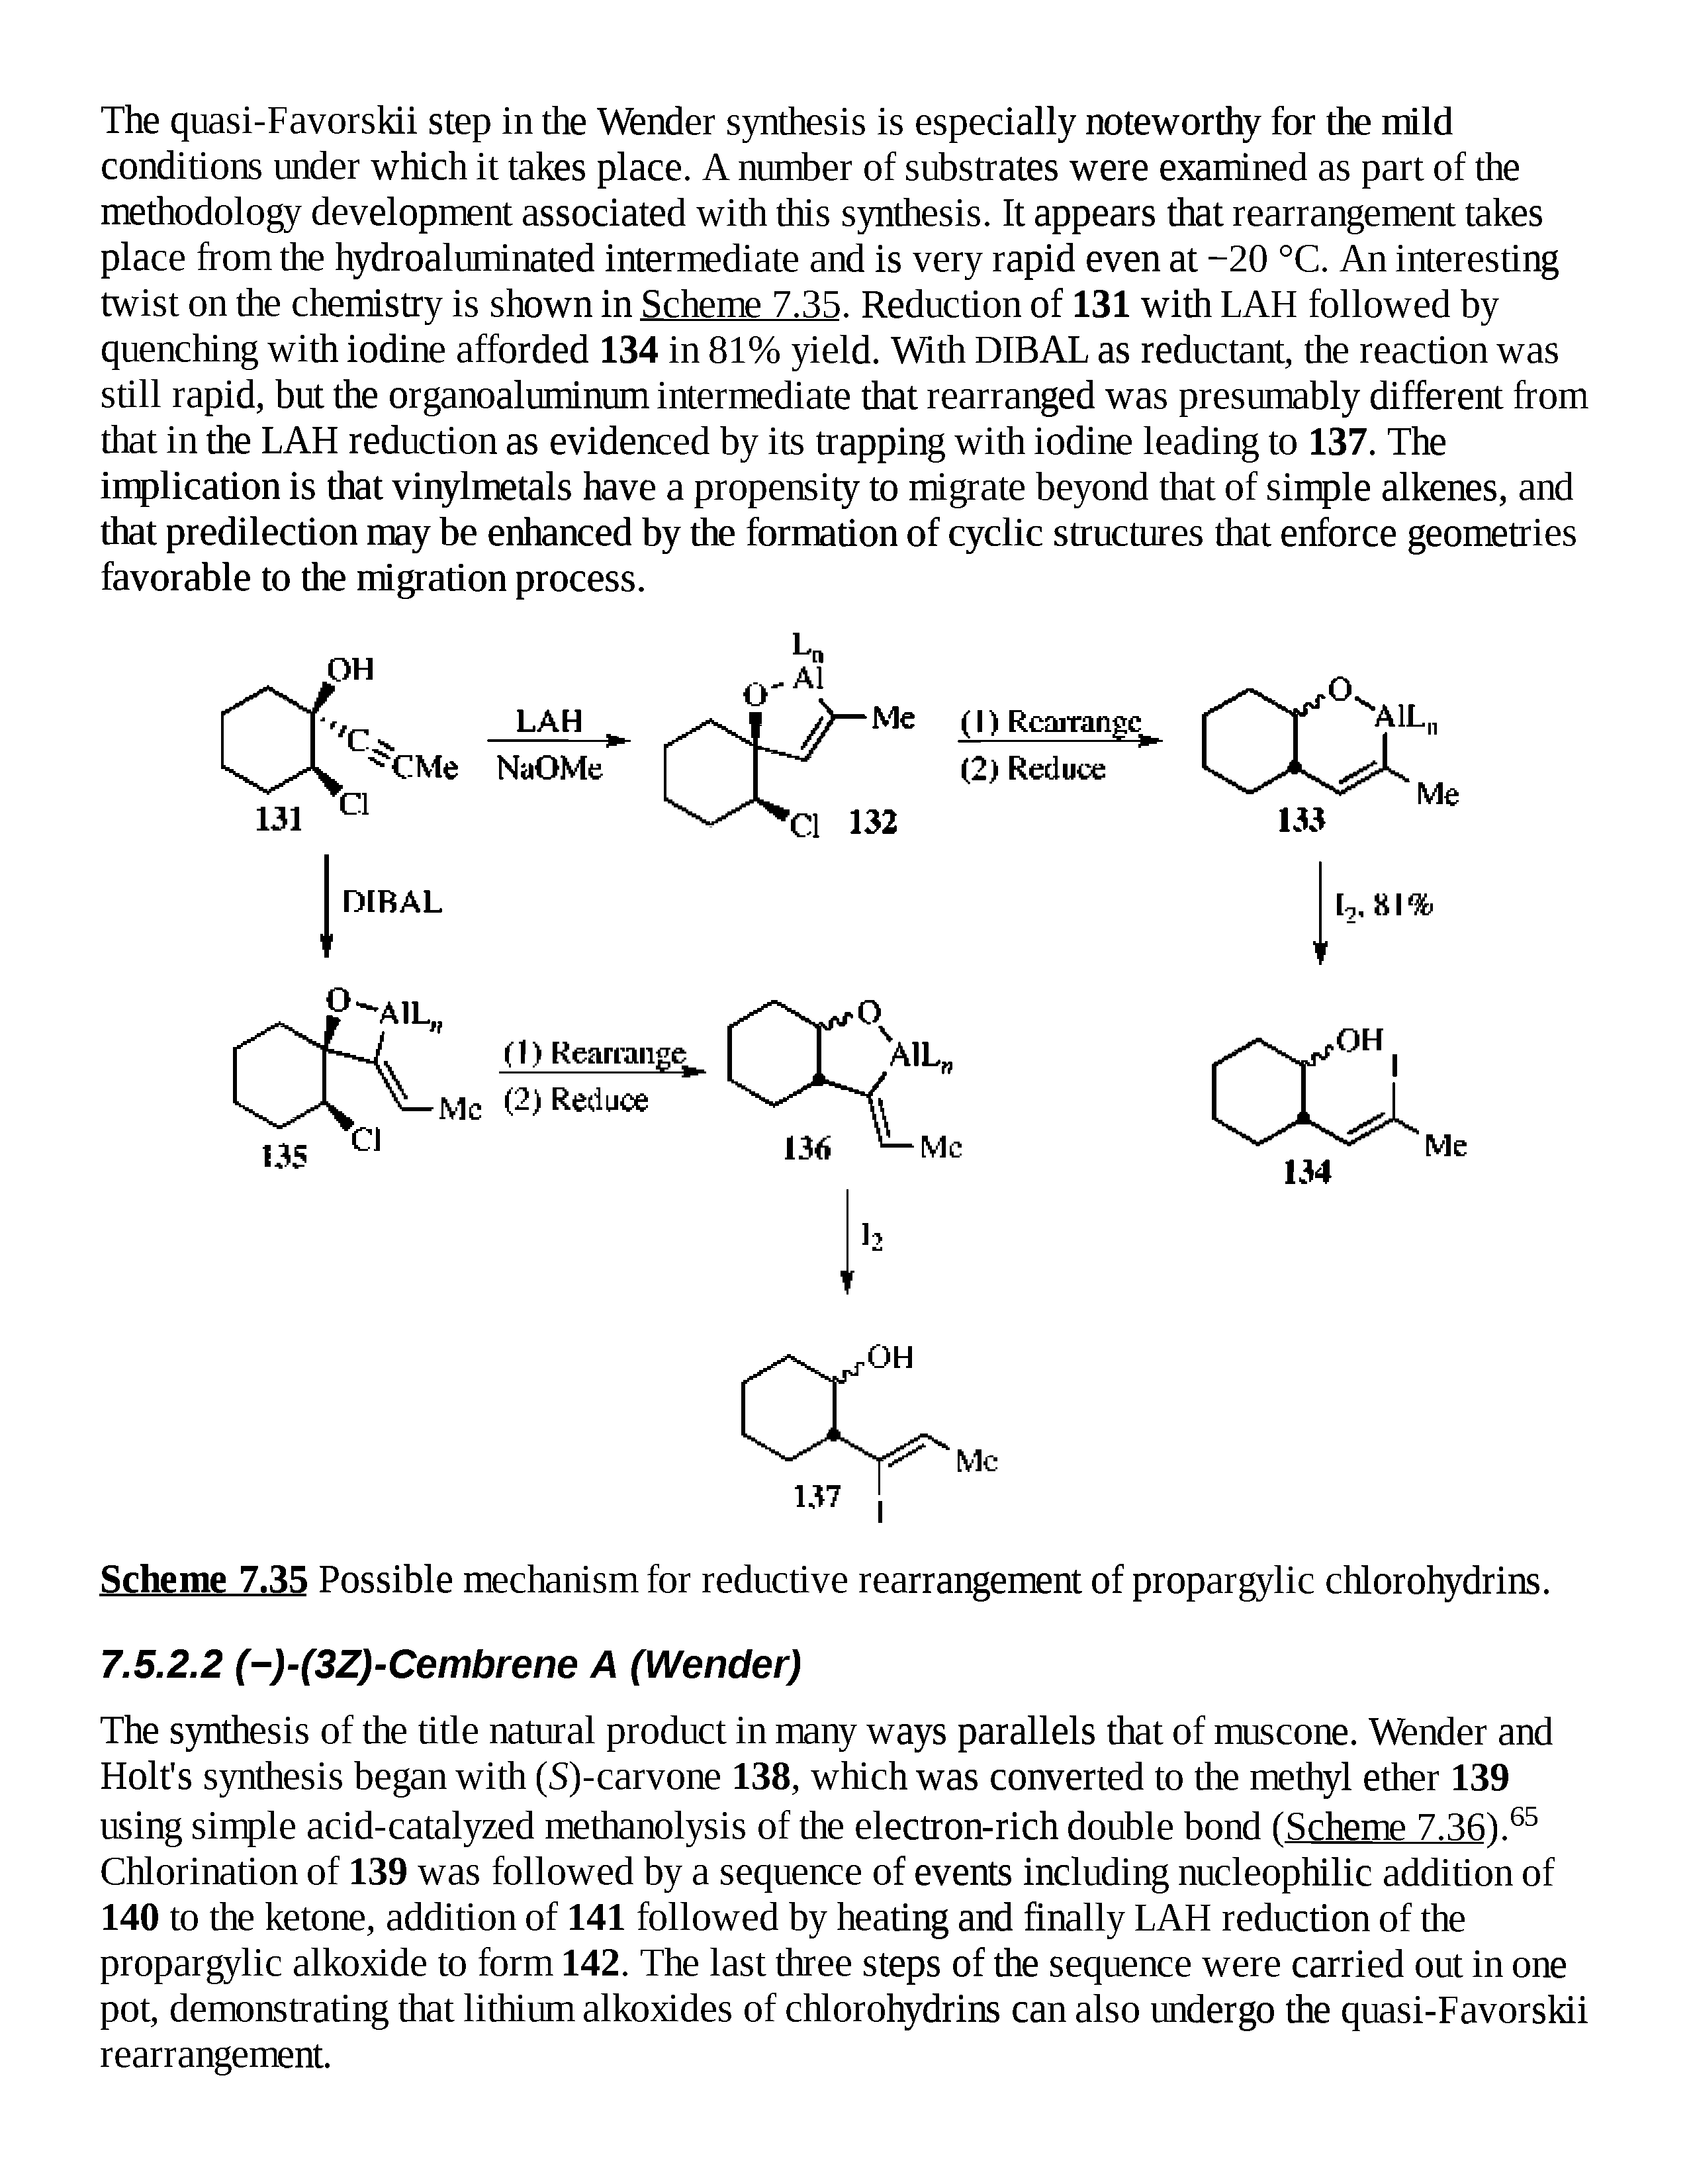 Scheme 7.35 Possible mechanism for reductive rearrangement of propargylic chlorohydrins. 7.S.2.2 (-)-(3Z)-Cembrene A (Wender)...